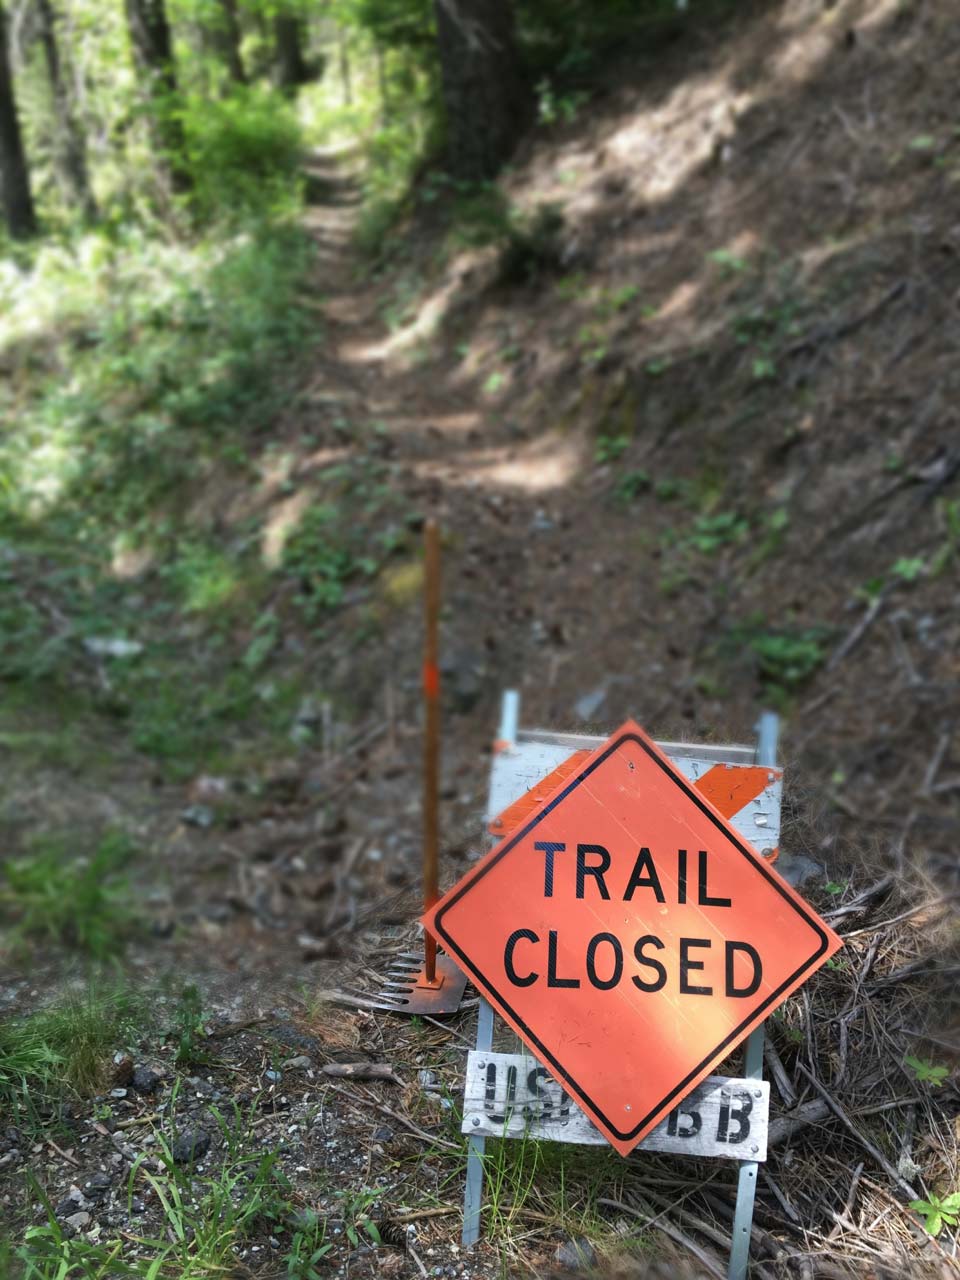 Trail Closed sign on trail